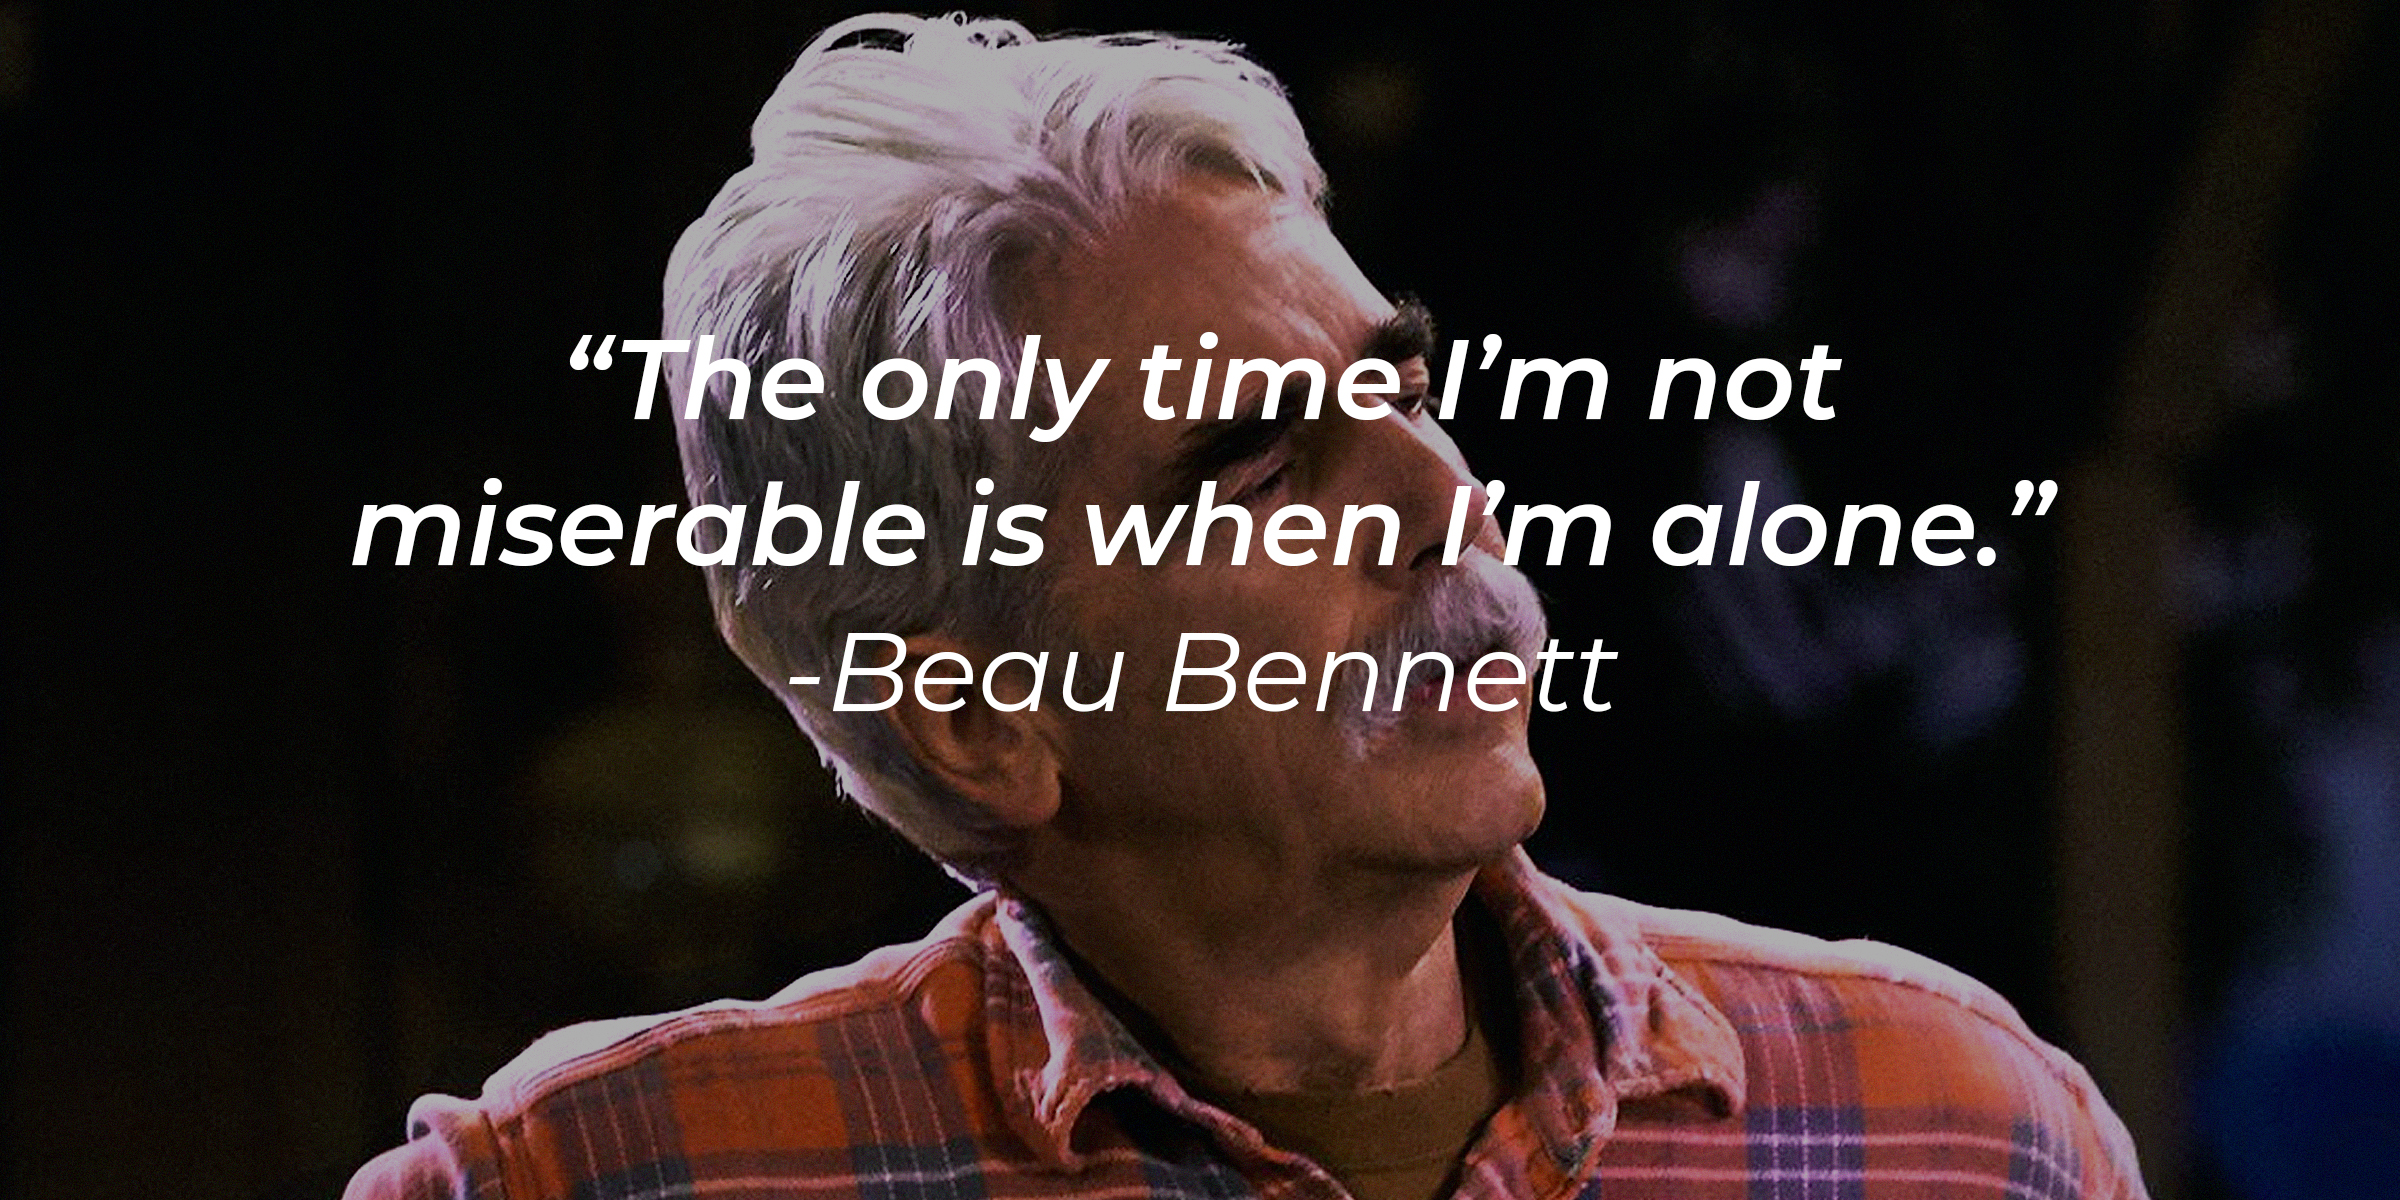 Beau Bennett with his quote: “The only time I’m not miserable is when I’m alone.” | Source: facebook.com/TheRanchNetflix